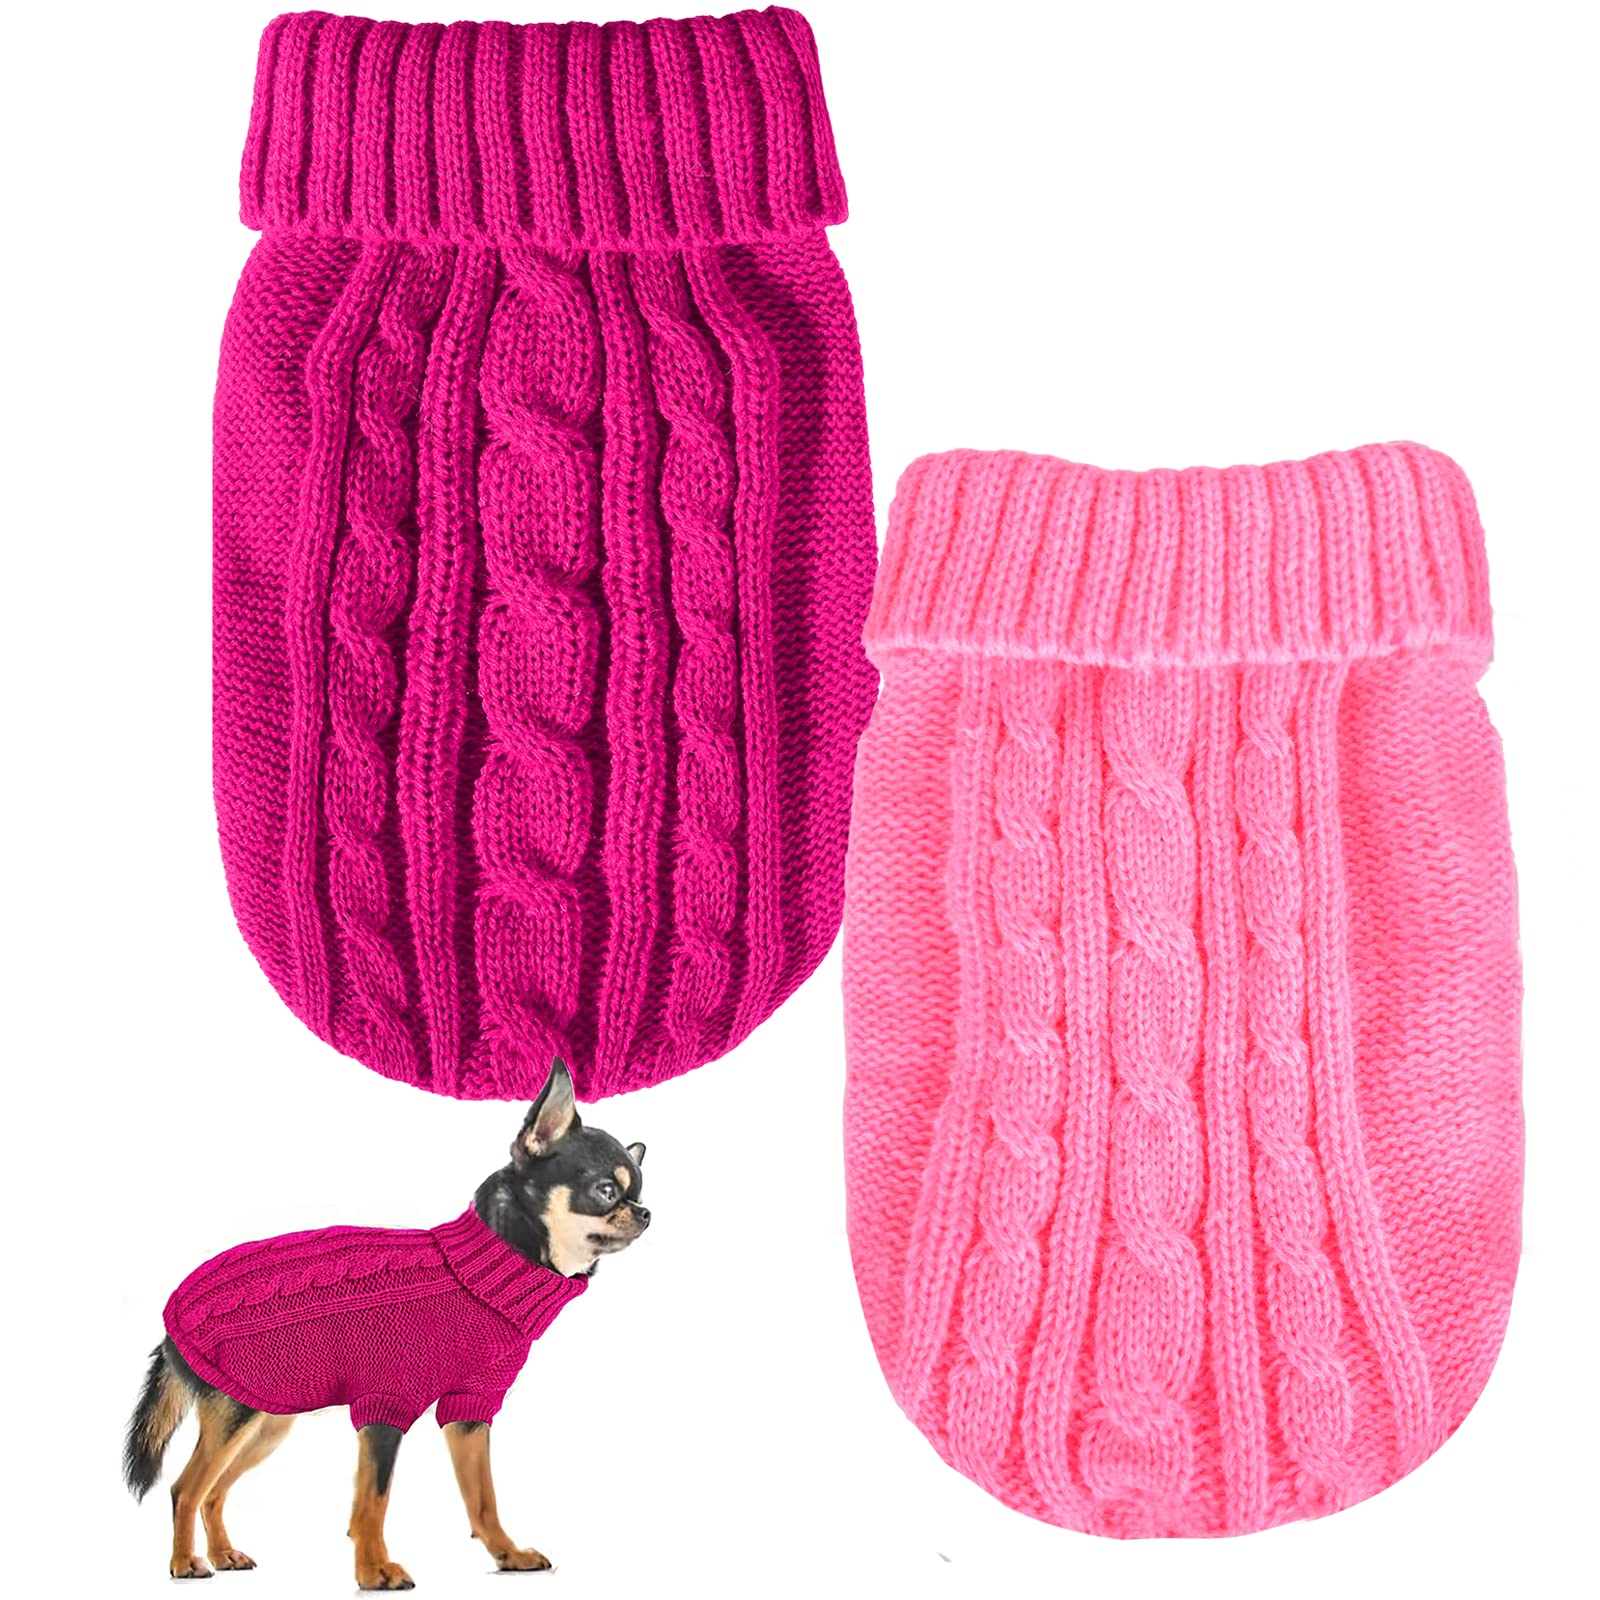 Set of 2 Dog Clothes for Small Dogs Girl Boy Turtleneck Knitted Chihuahua  Sweater, Girl Dog